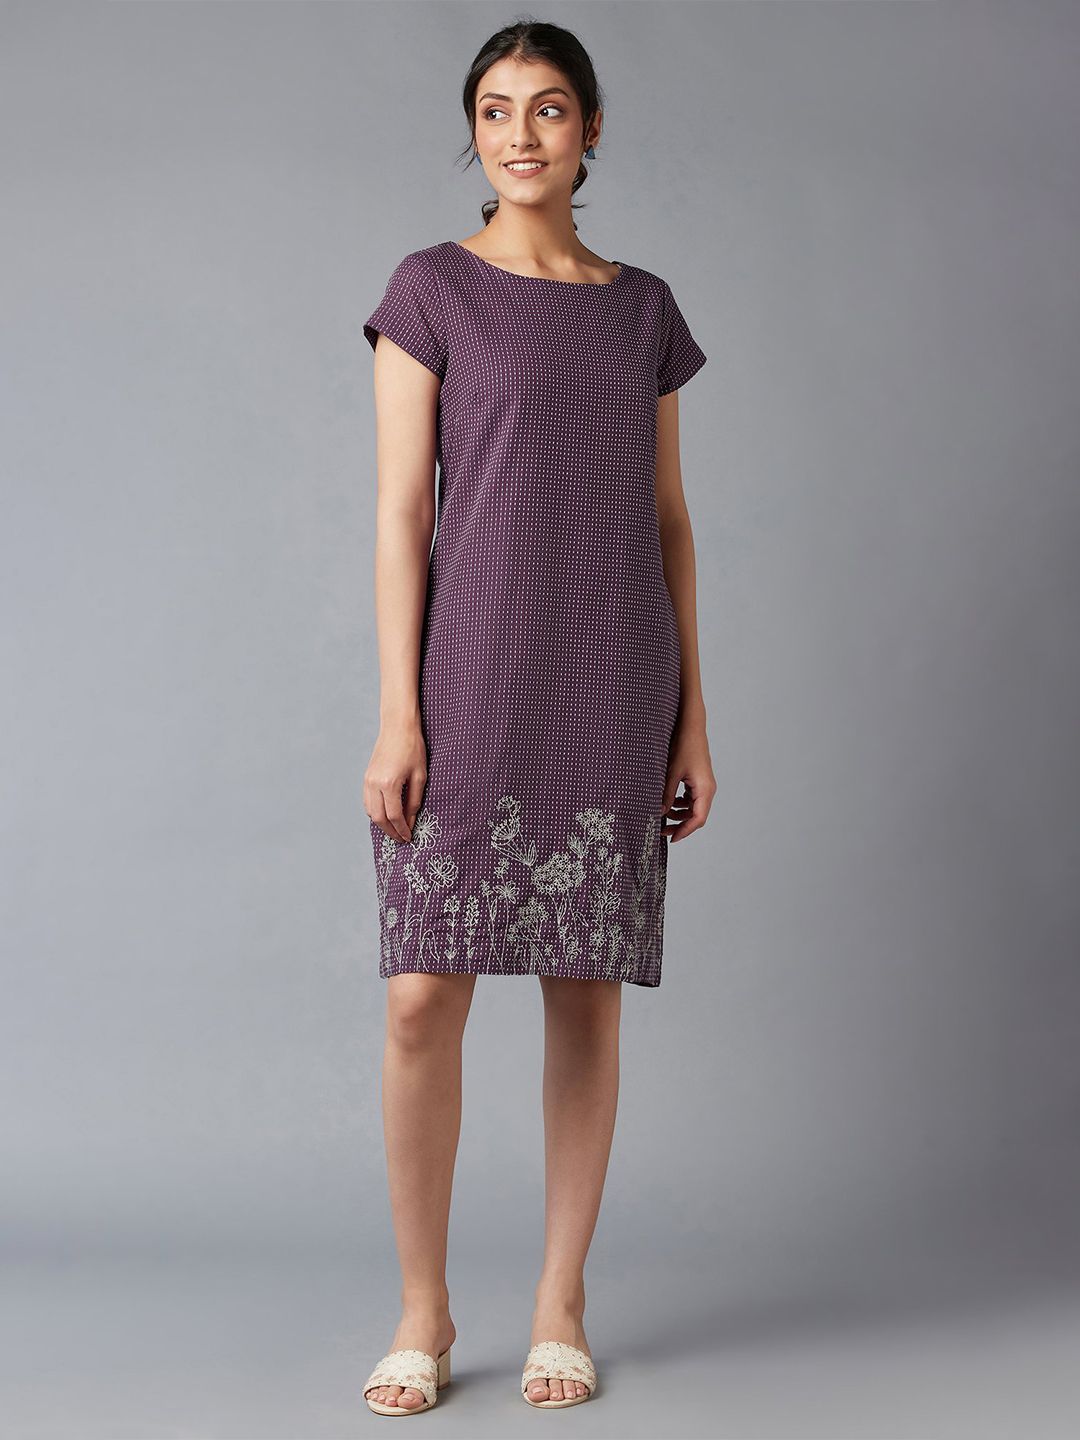 W Purple Floral A-Line Dress Price in India